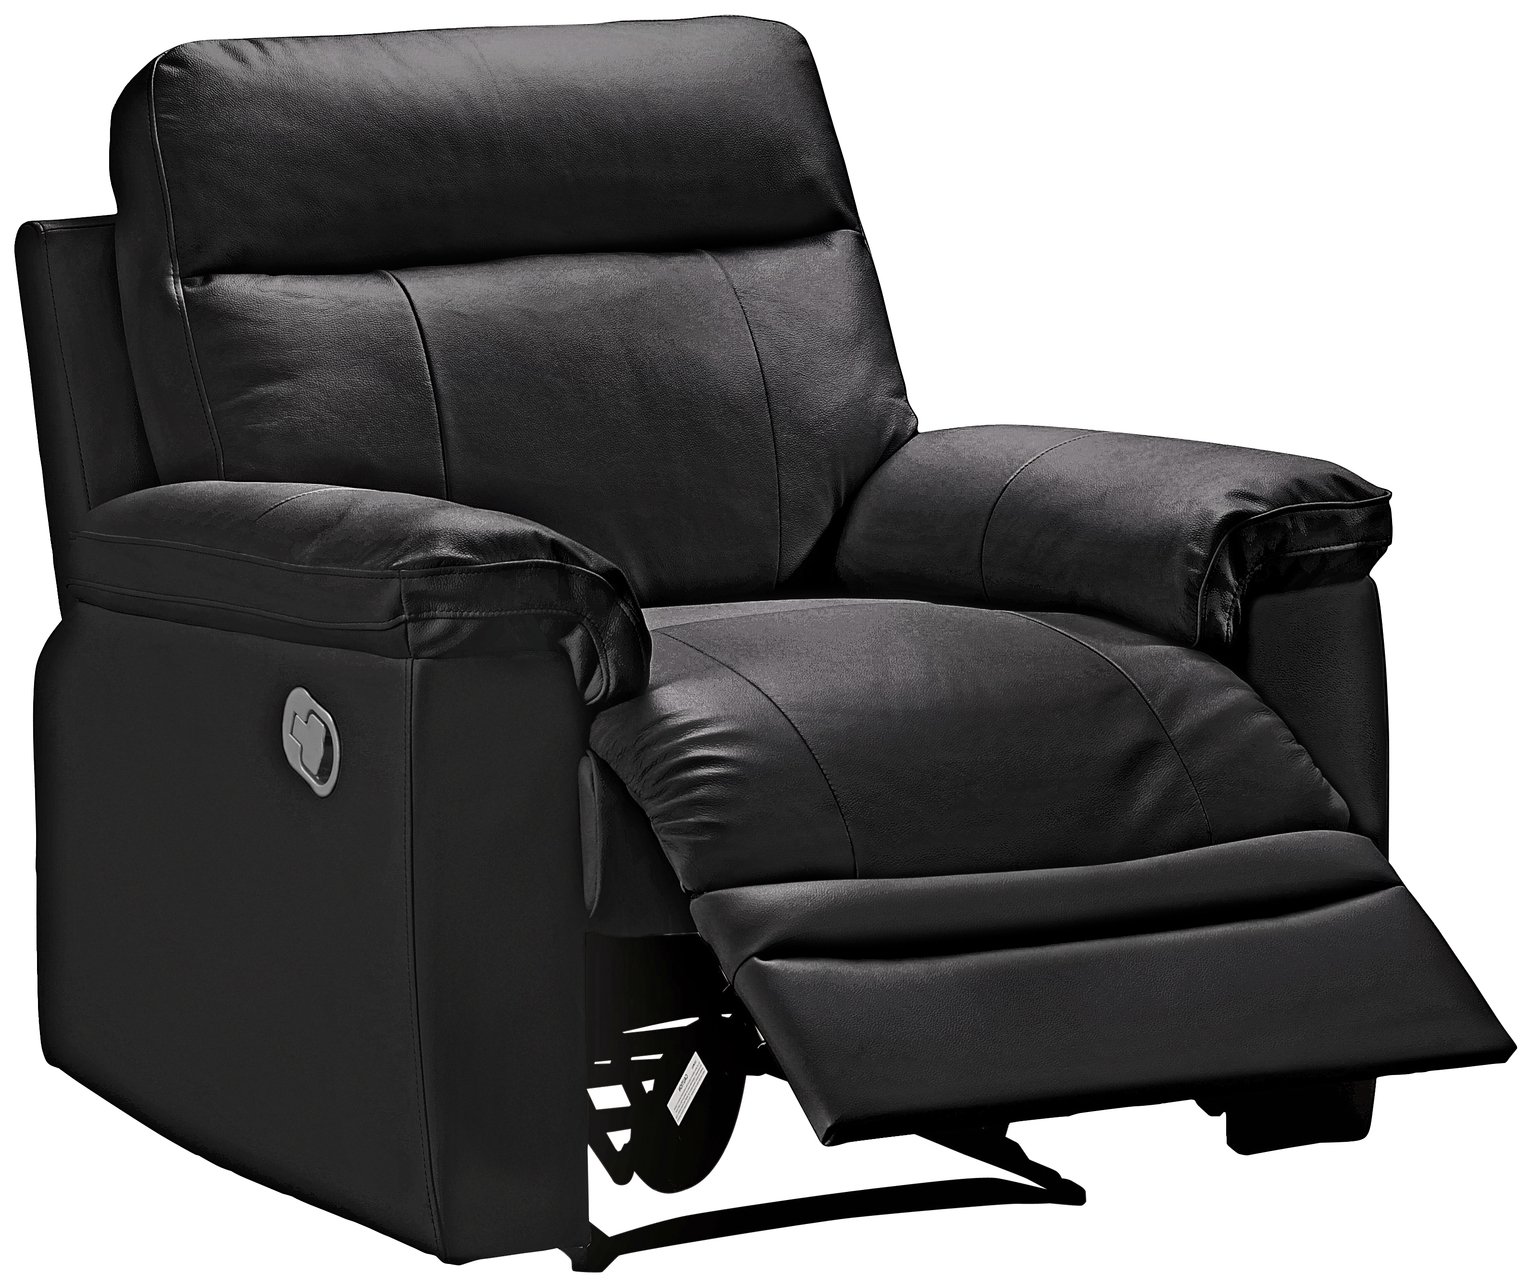 Argos Home Paolo Leather Mix Manual Recliner Chair - Black